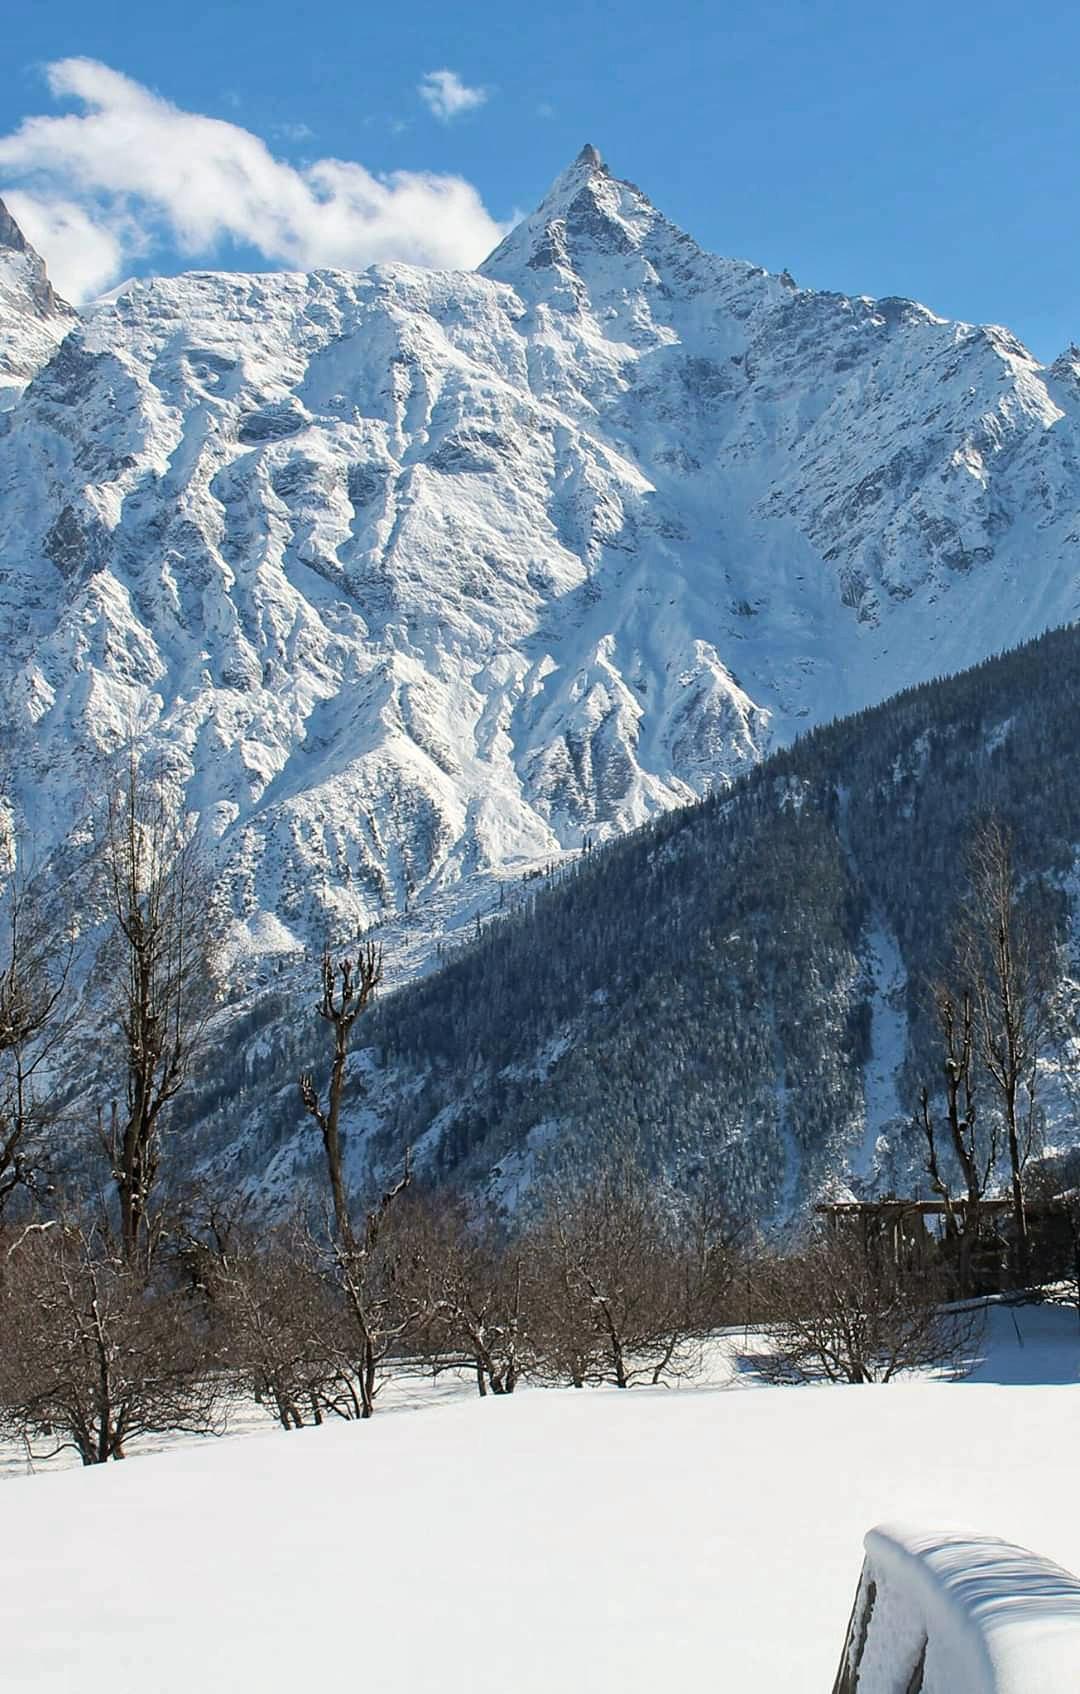 Raldang mountain of Kinnaur-Kailash mountain range bathing in morning sunshine. The picture was clicked from Chini village of Kalpa. Kalpa is 9 hours drive away from the state capital, Shimla.